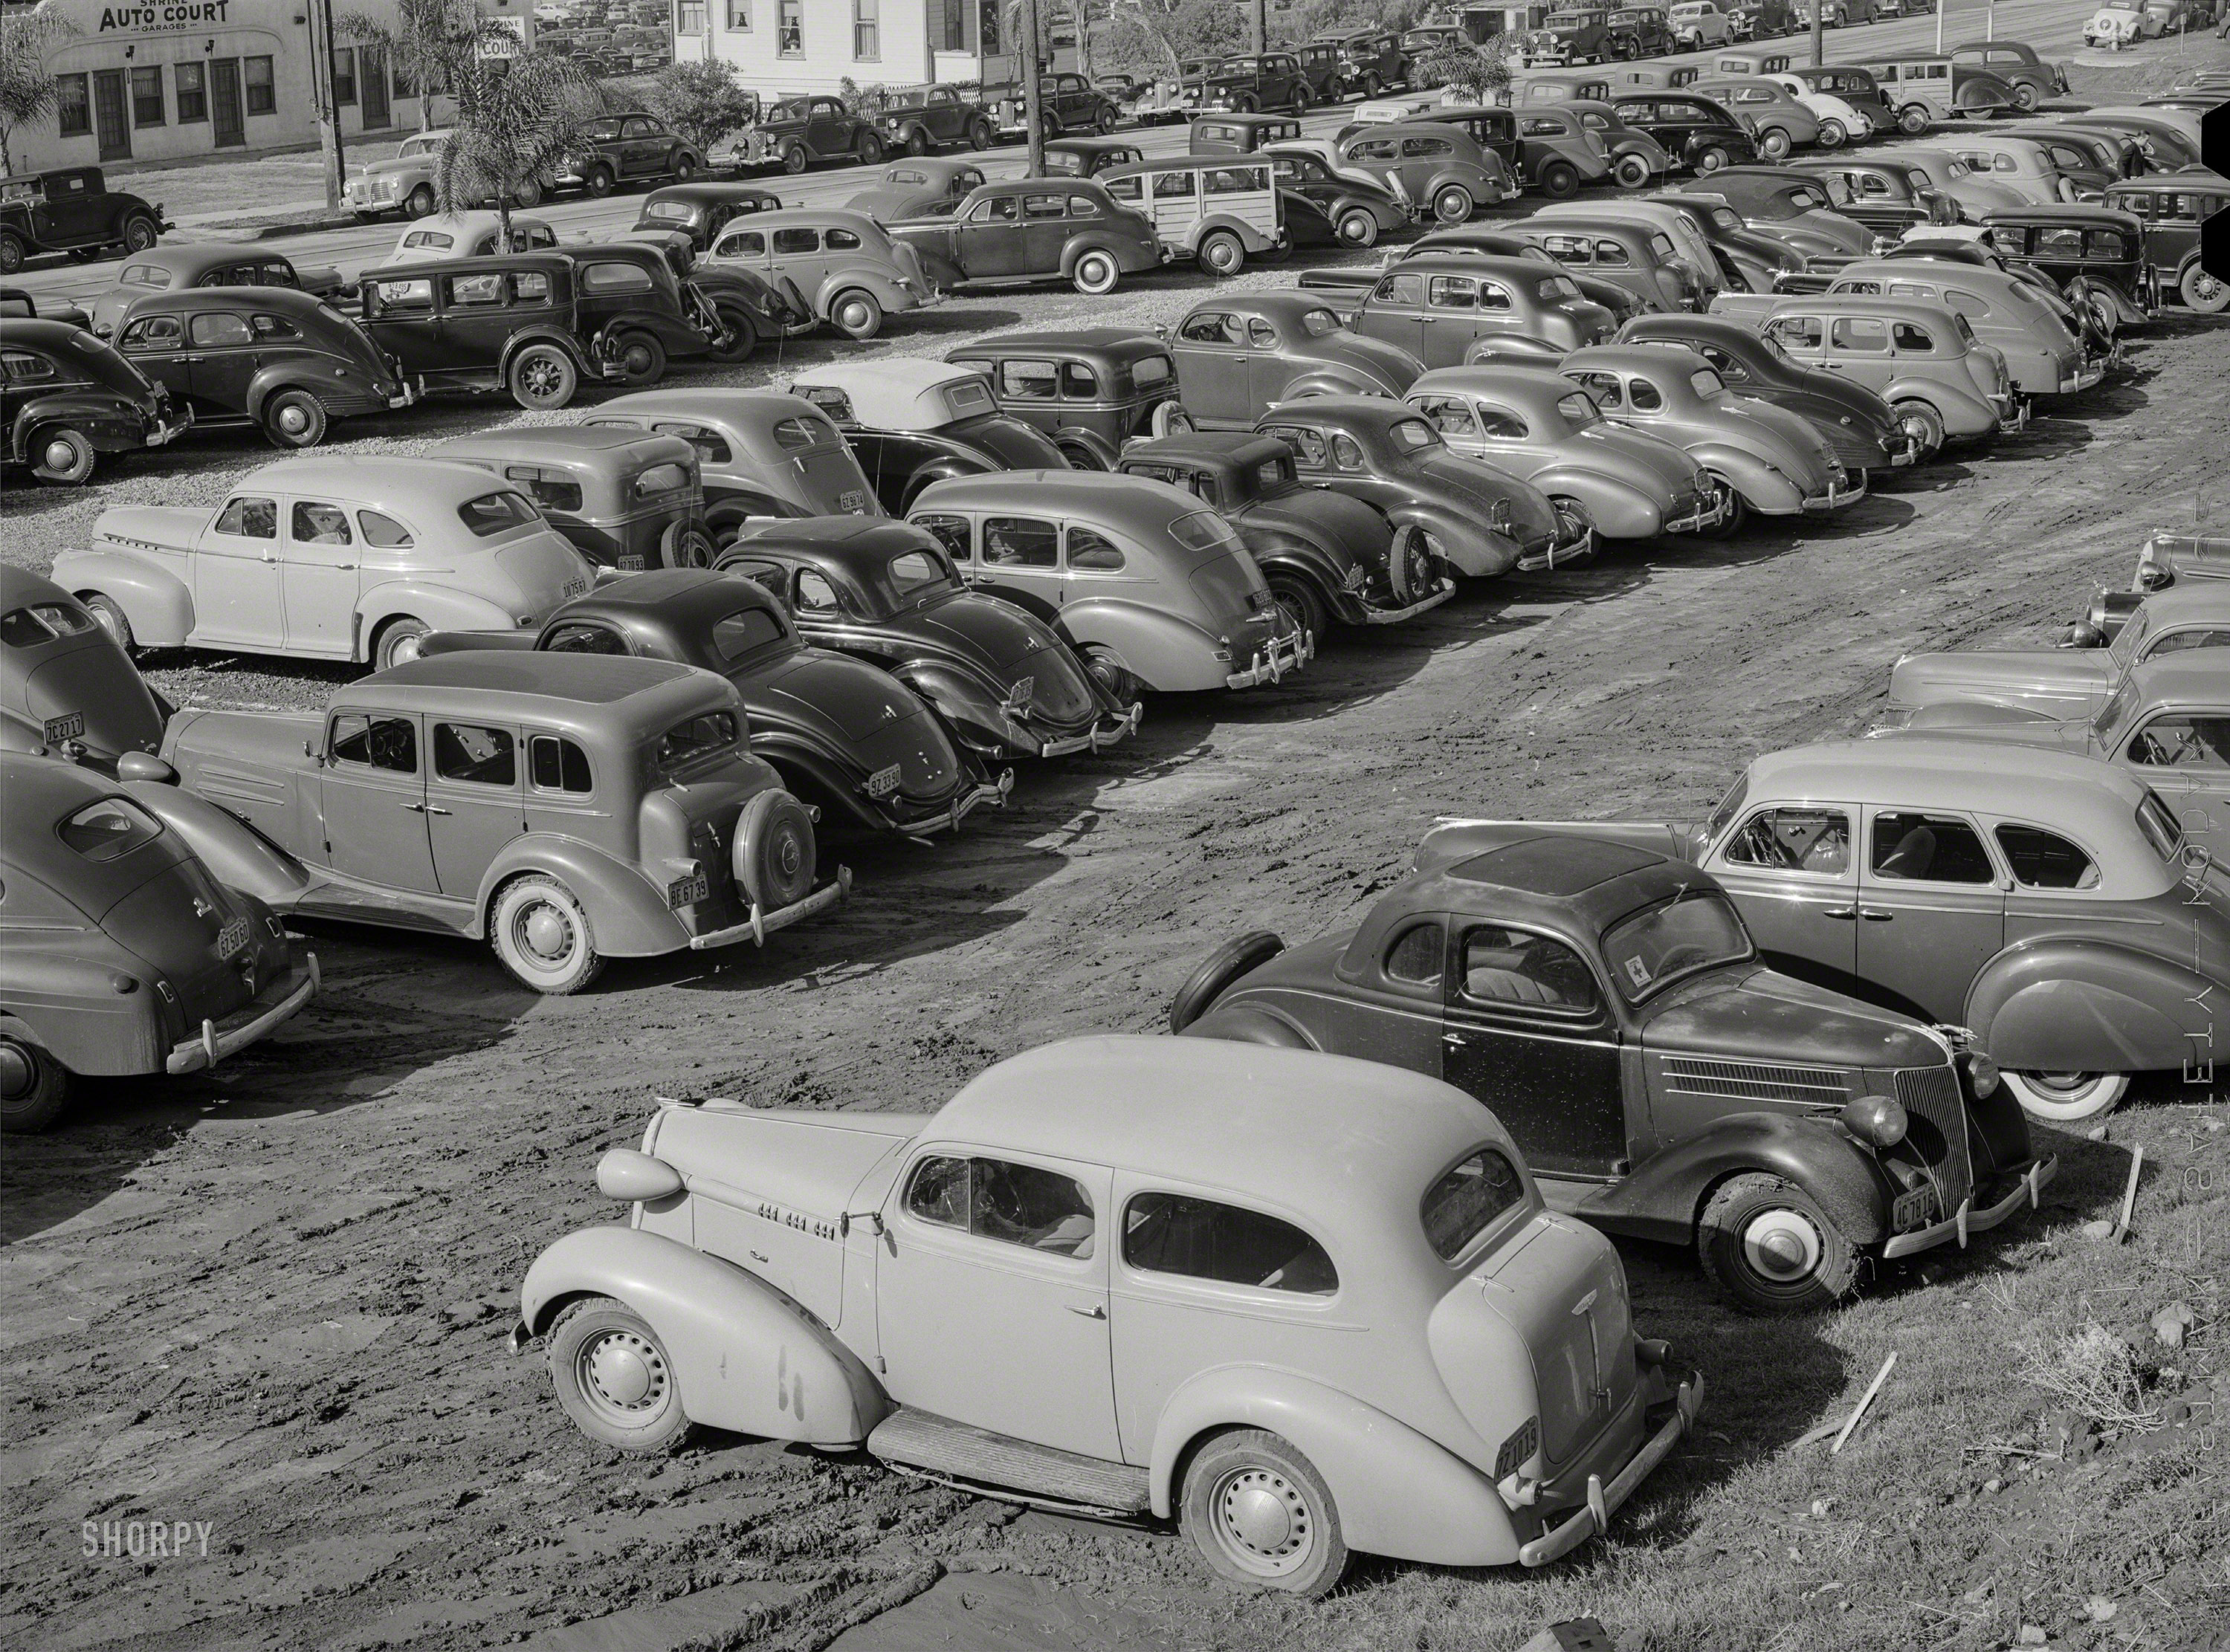 December 1940. "San Diego, California. Workers' automobiles parked near the airplane factories. Providing parking space for automobiles and getting the cars in and out at shift changing time have been big problems." Medium format acetate negative by Russell Lee for the Farm Security Administration. View full size.